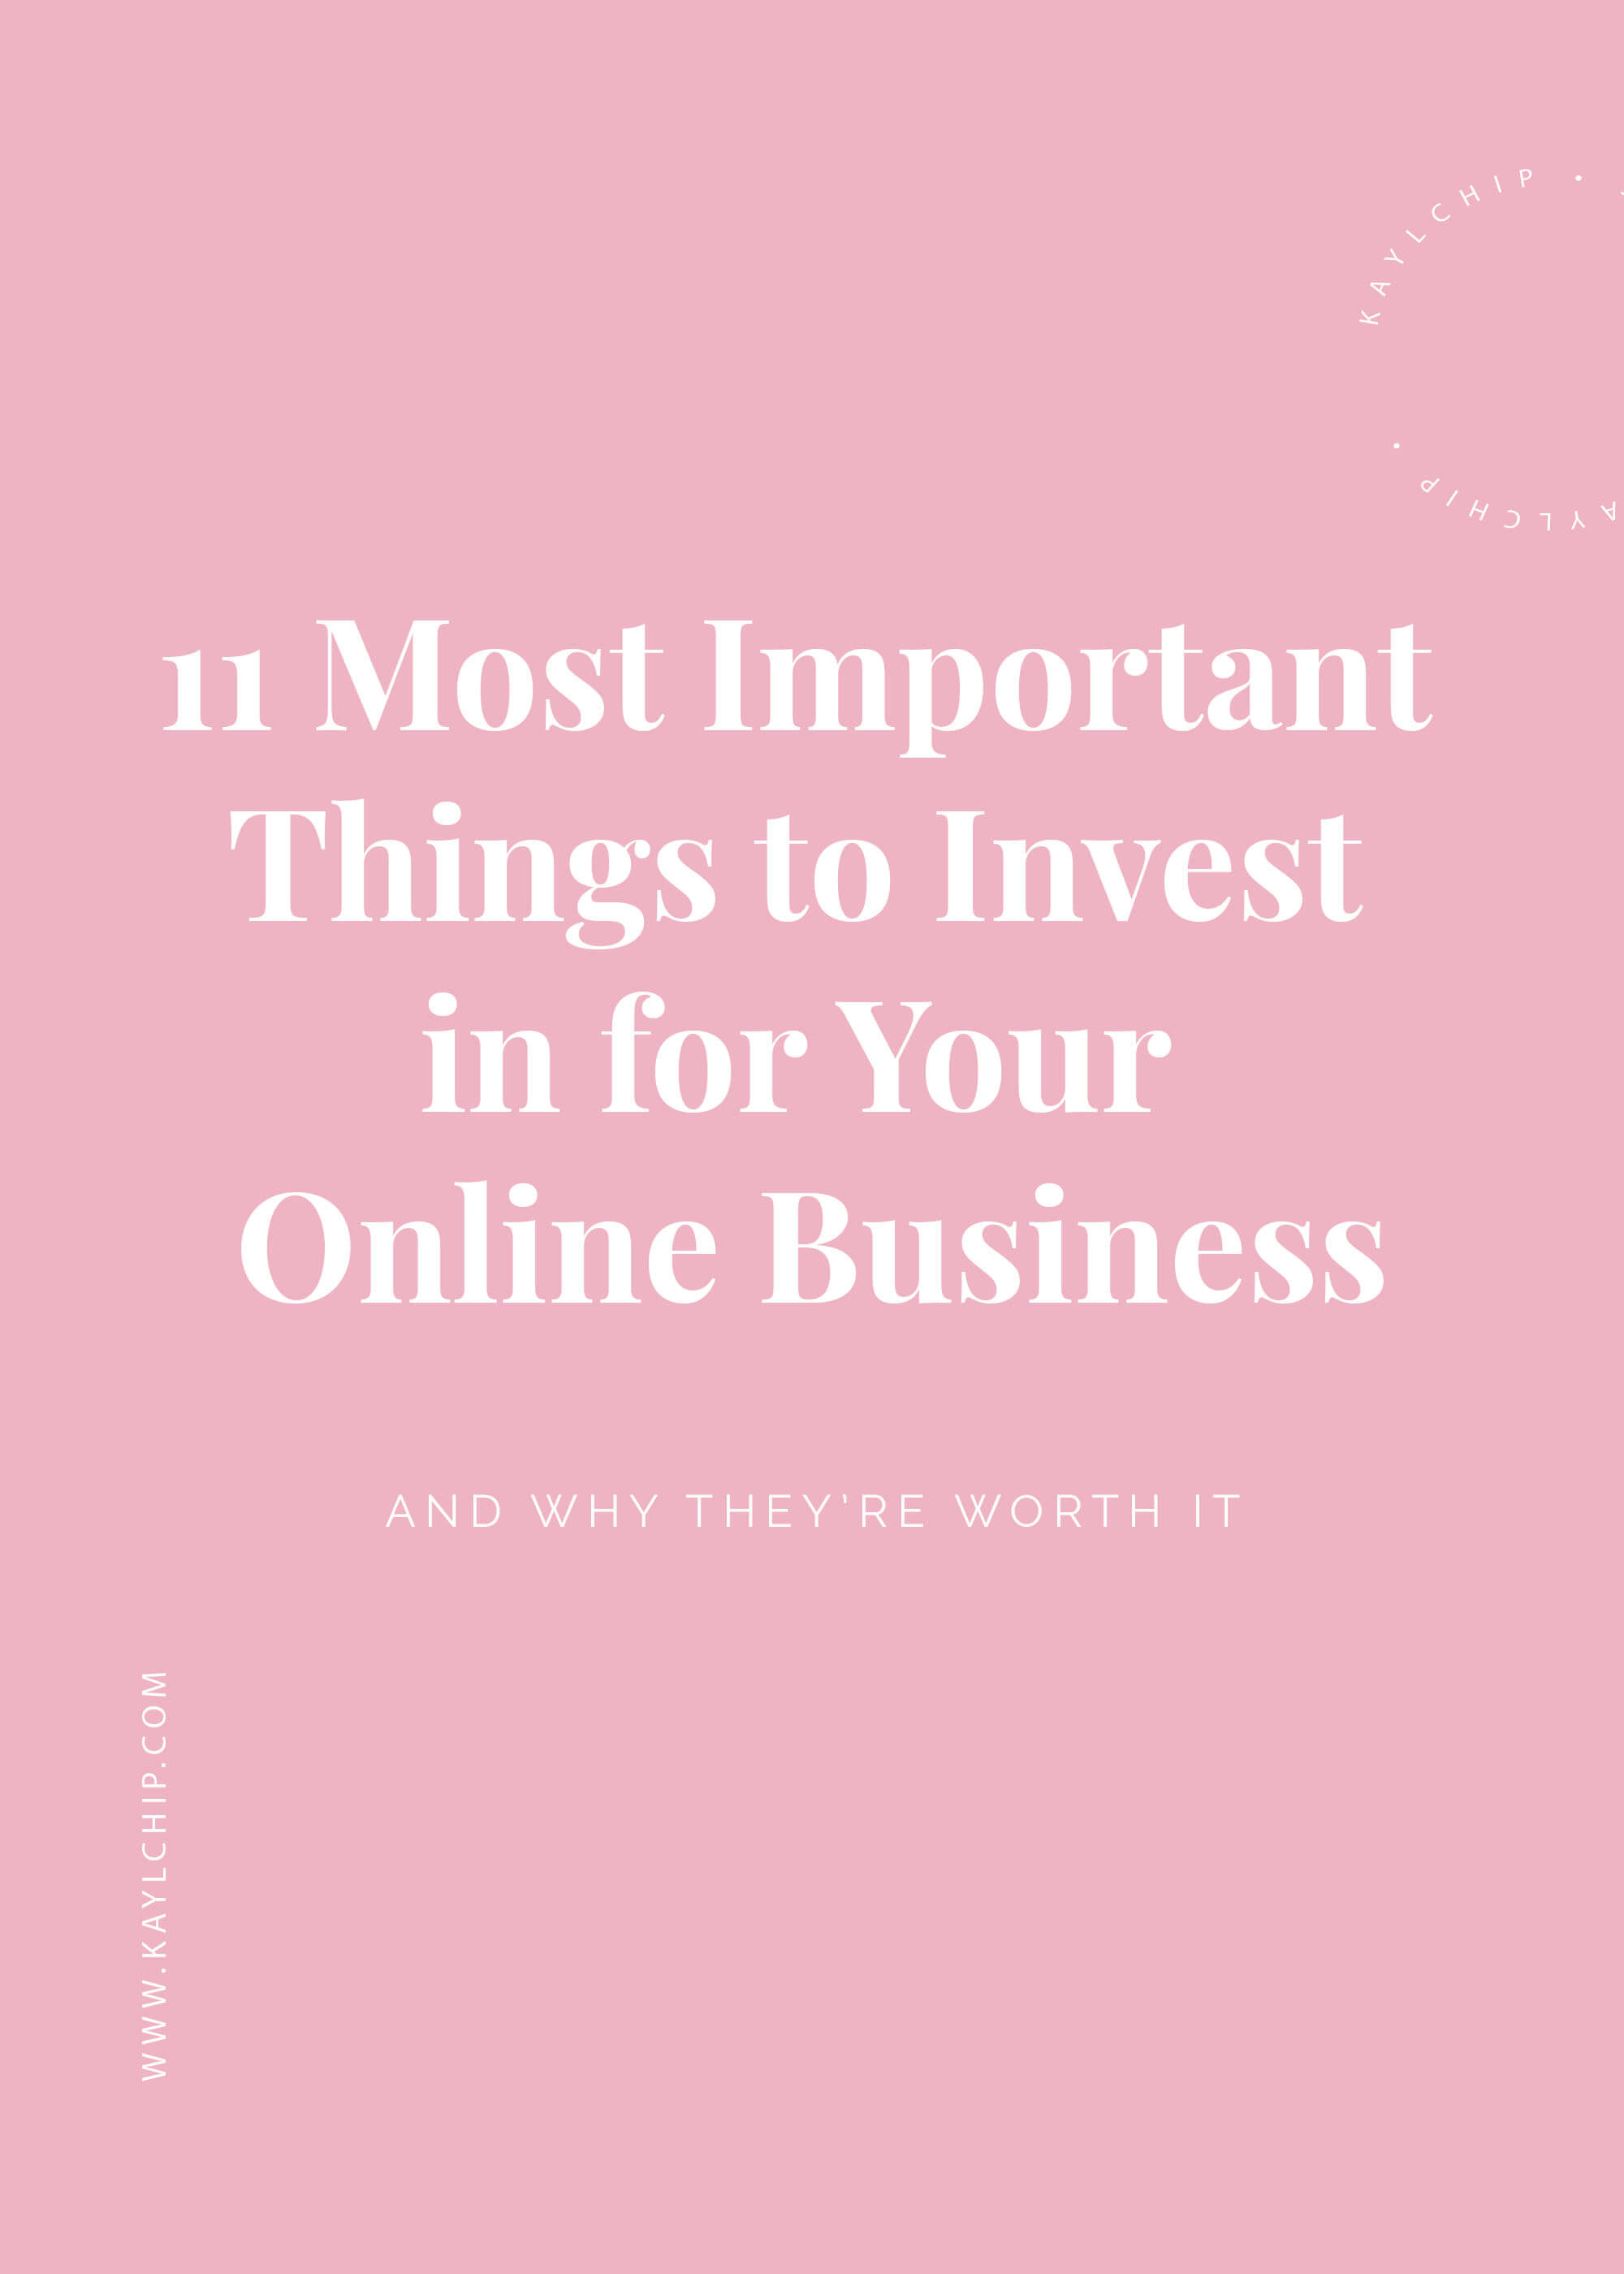 11 Most Important Things to Invest in for Your Online Business (that